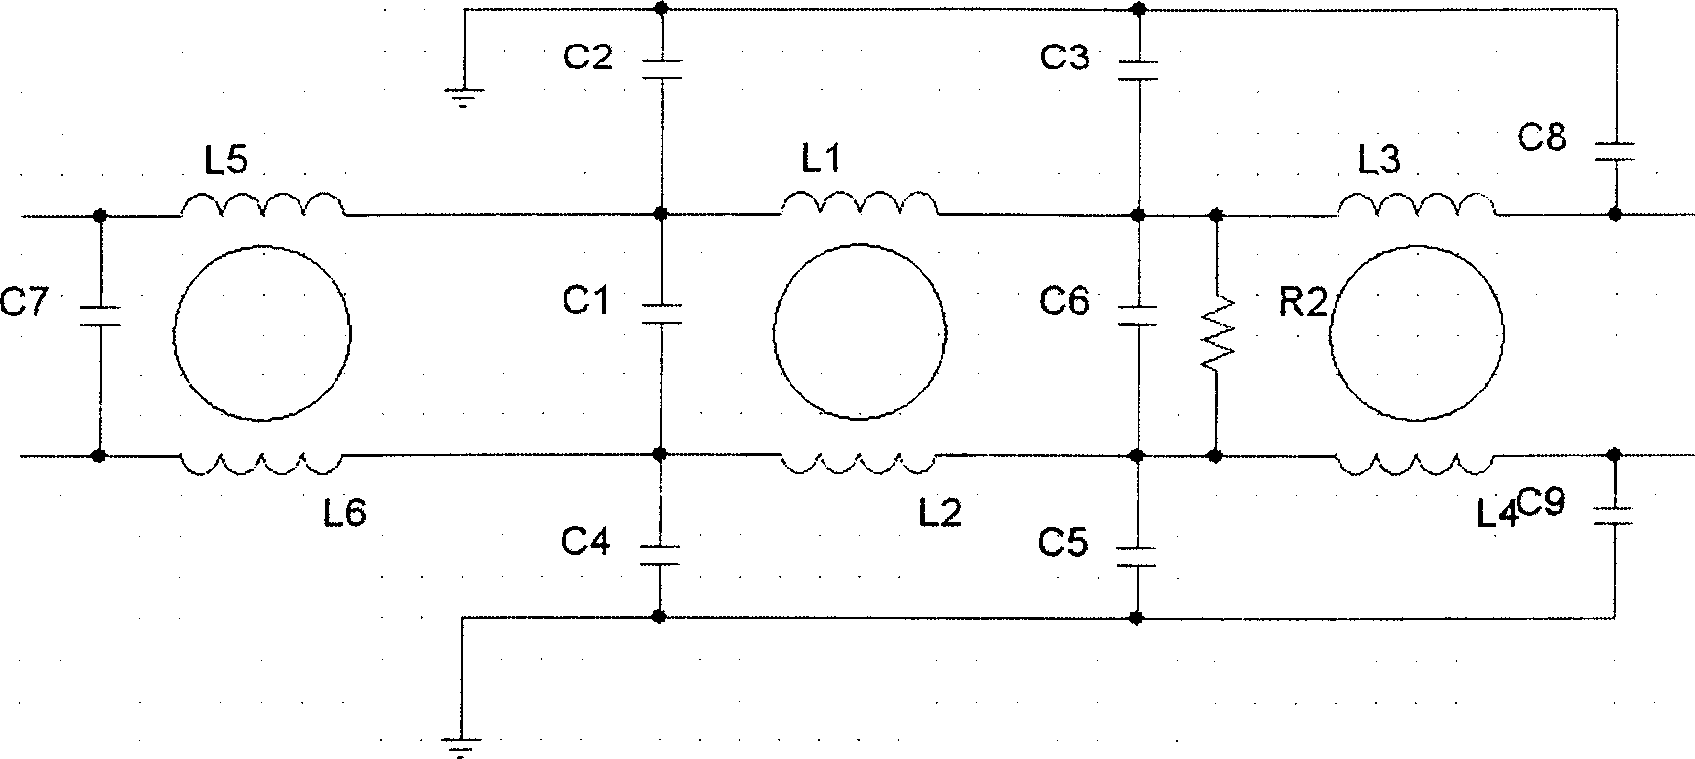 Electromagnetic interference eliminator for power system automation apparatus